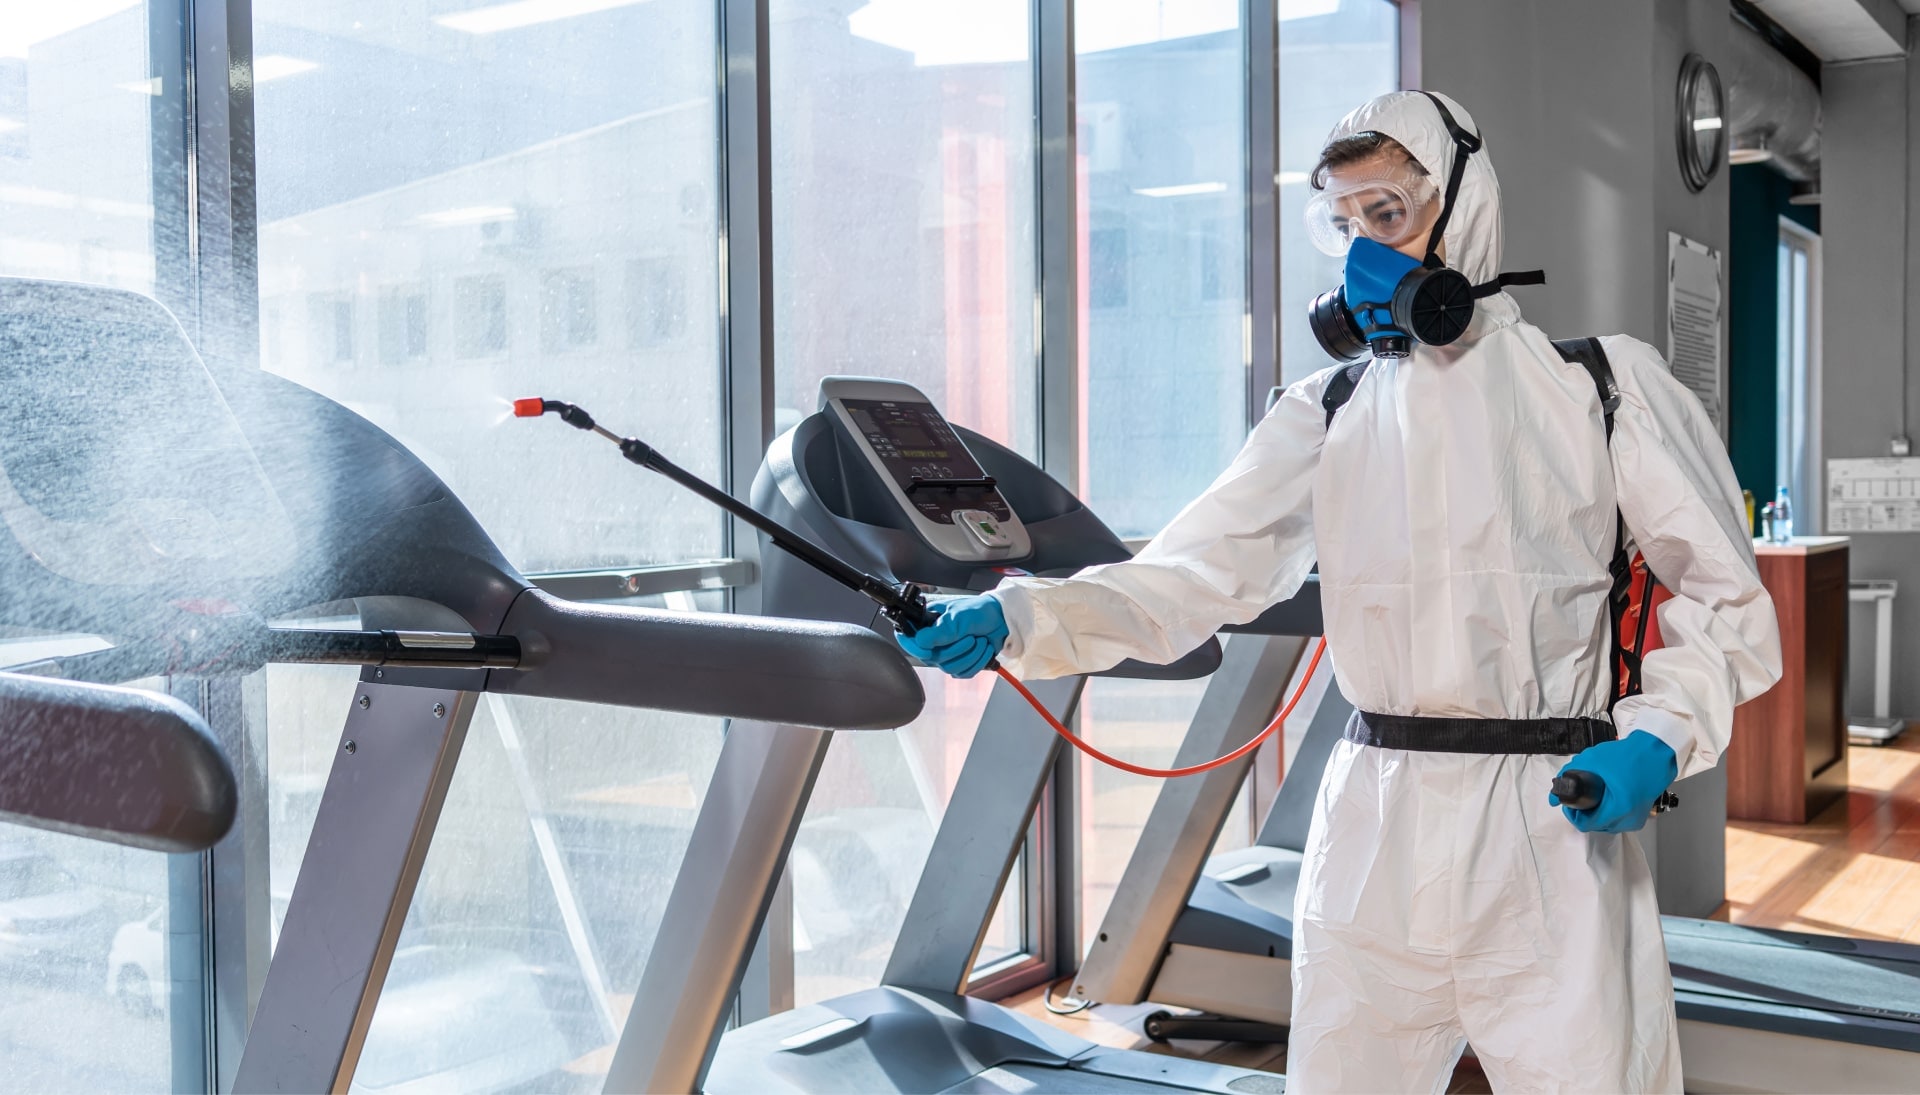 For commercial mold removal, we use the latest technology to identify and eliminate mold damage in Dayton, Ohio, so you can have peace of mind.